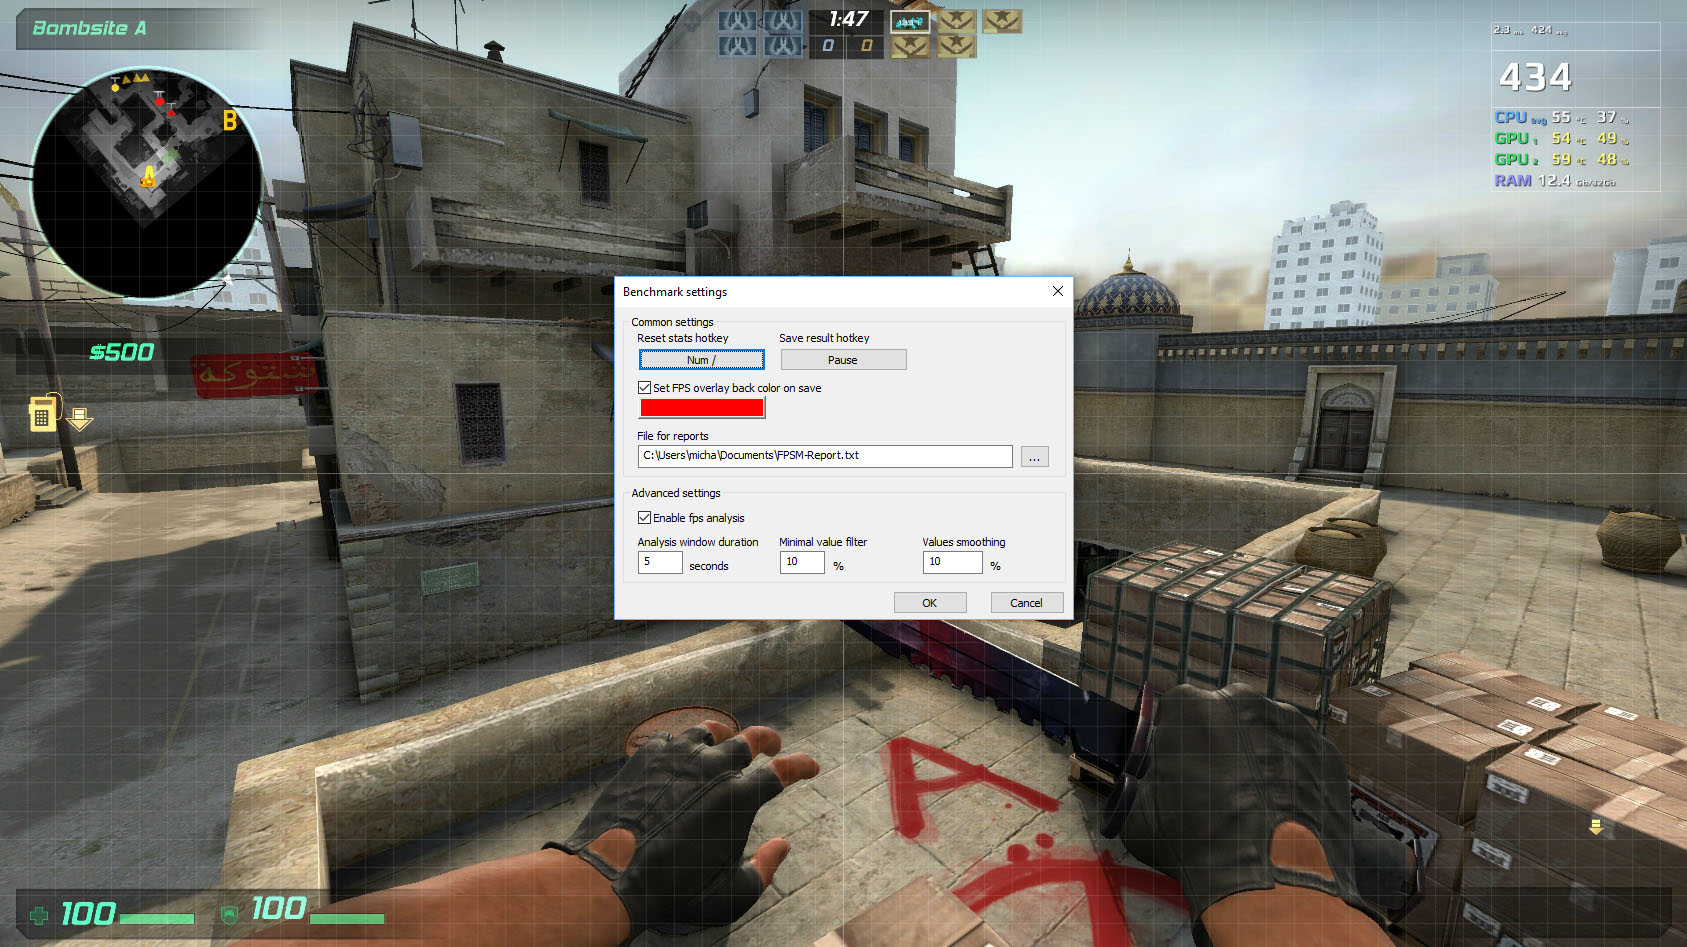 Fps Monitor Ingame Overlay Tool Which Gives Valuable System Information And Reports When Hardware Works Close To Critical State - fps counter roblox